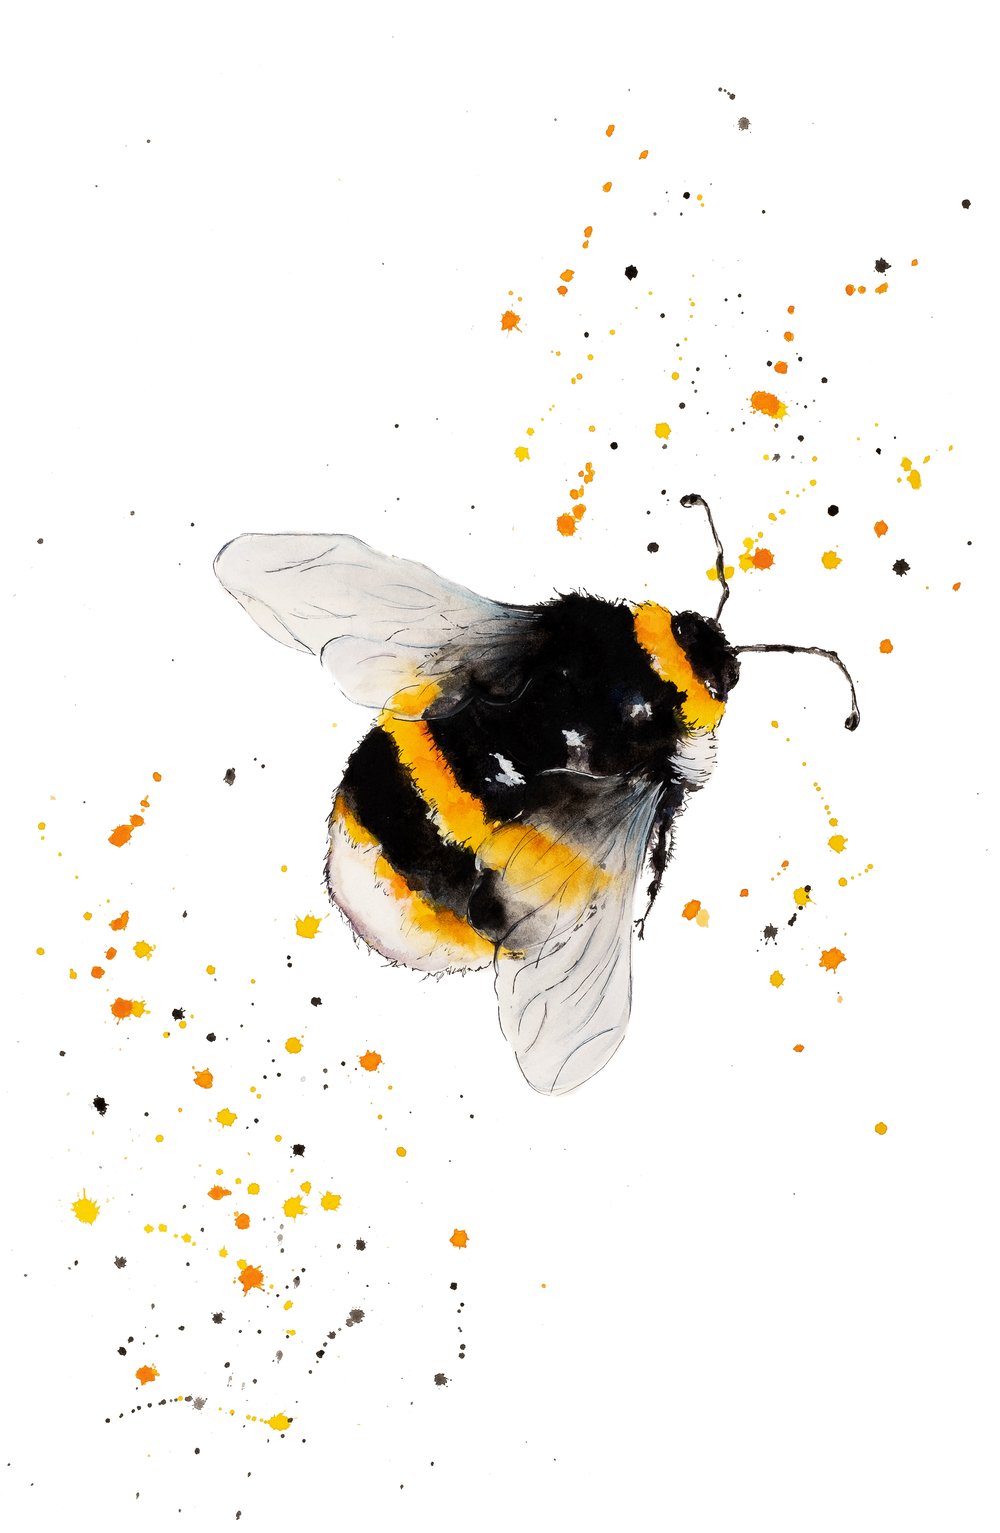 Image of "Just Buzzing Around" - From The CountryLife Collection